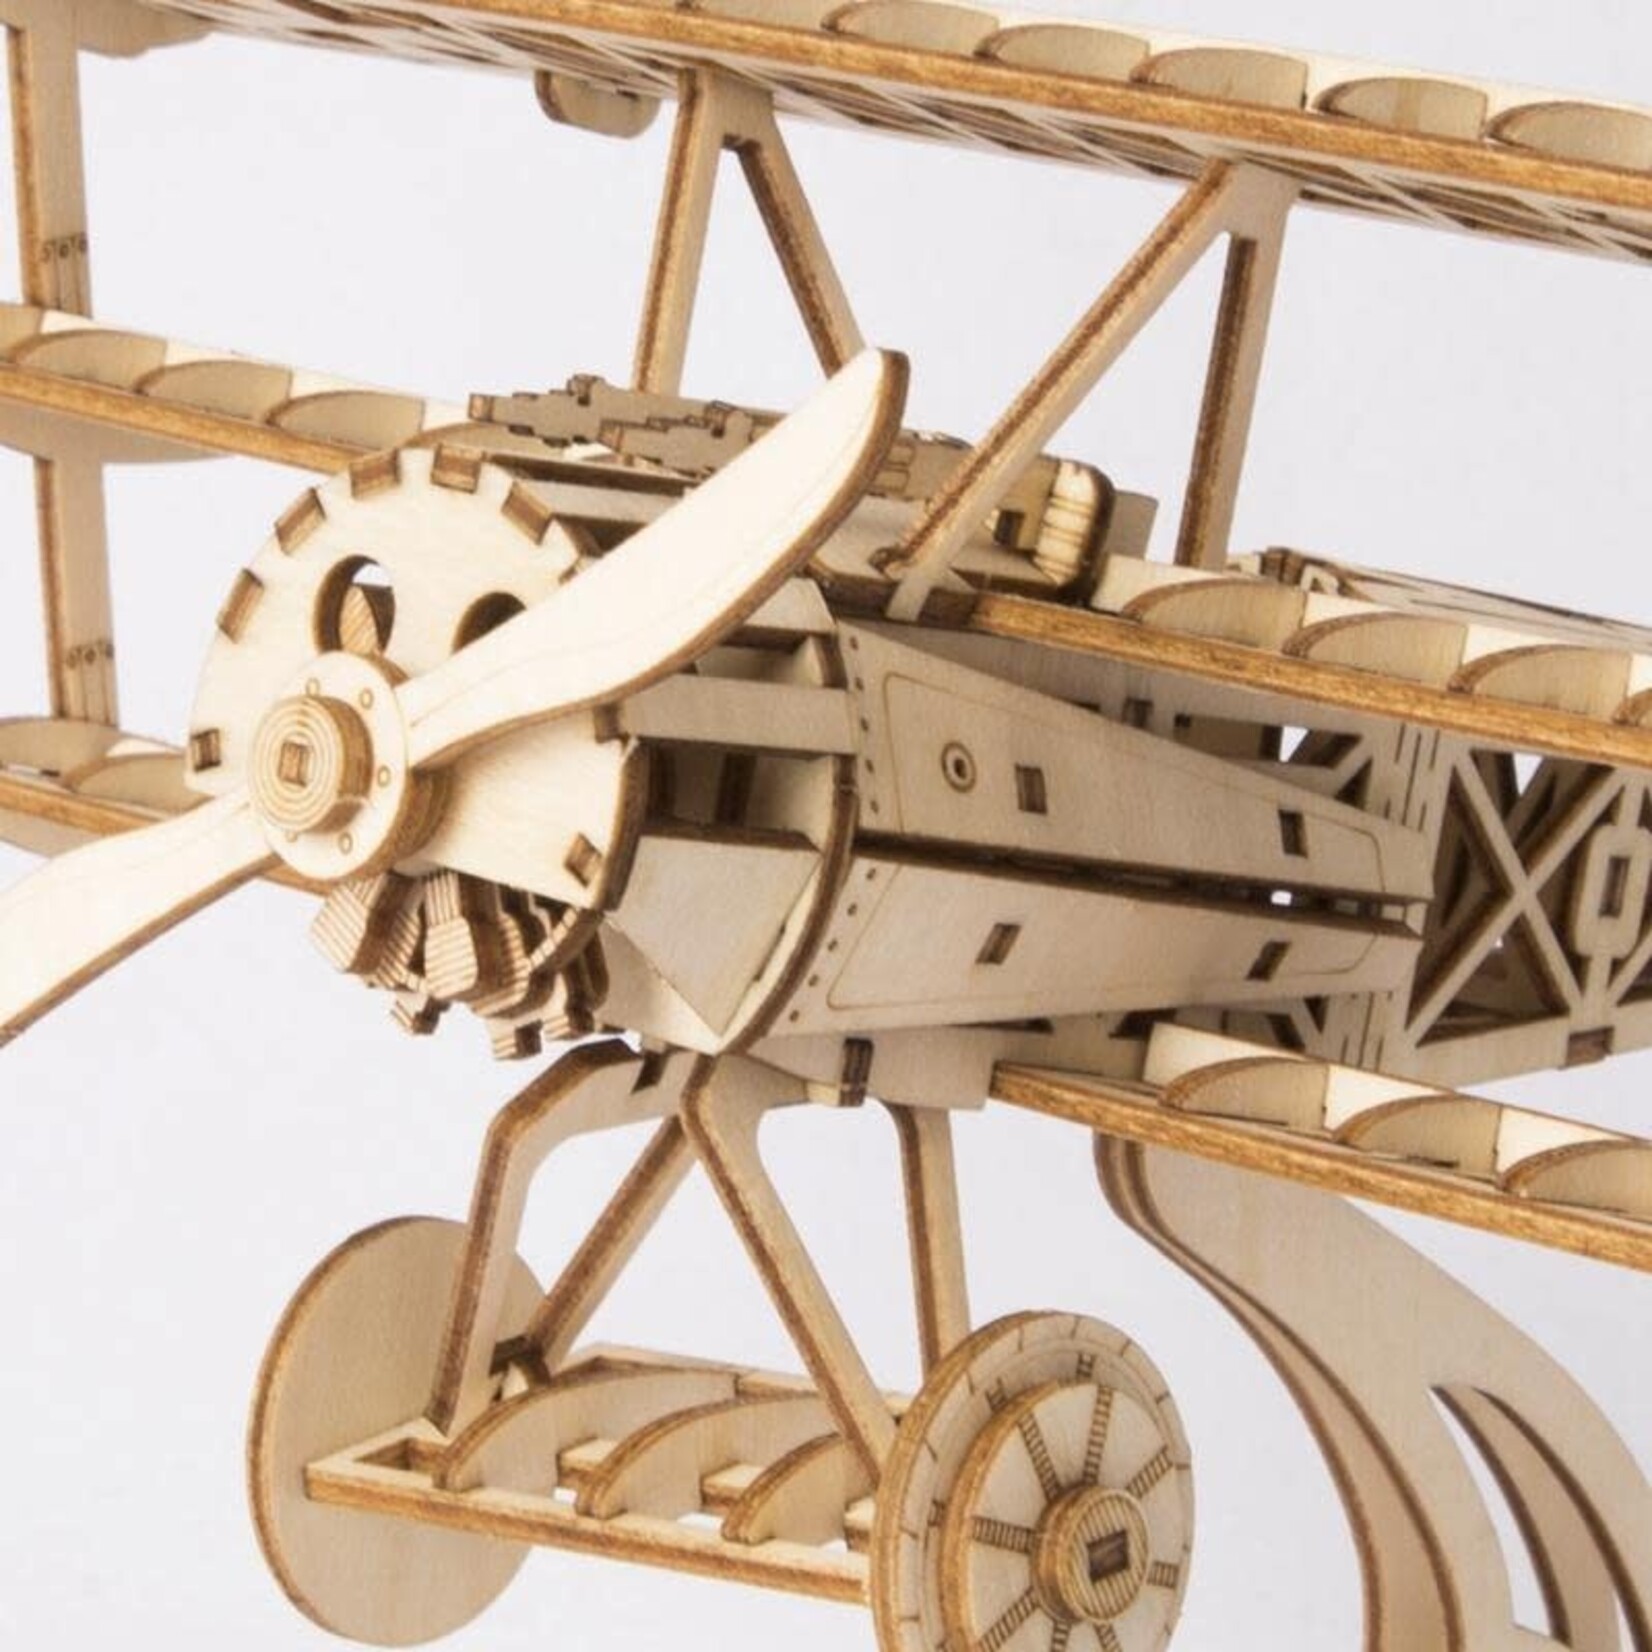 TG301, 3D Wooden Puzzle: Airplane